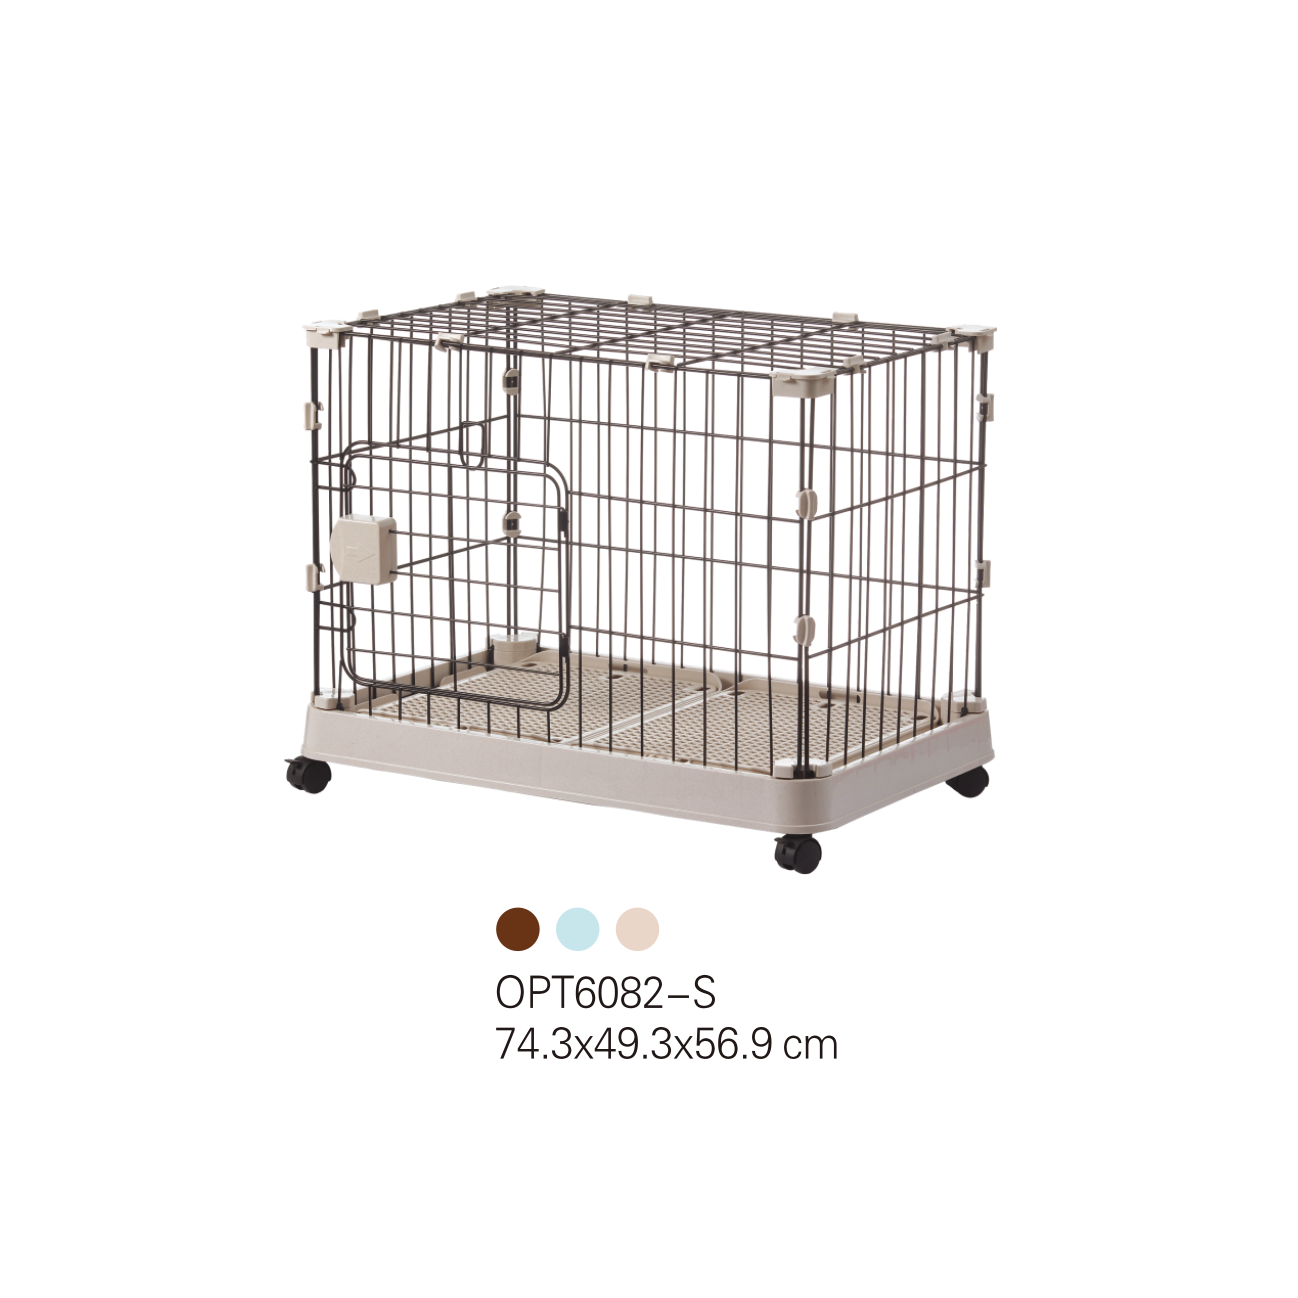 OPT76082 Pet cage